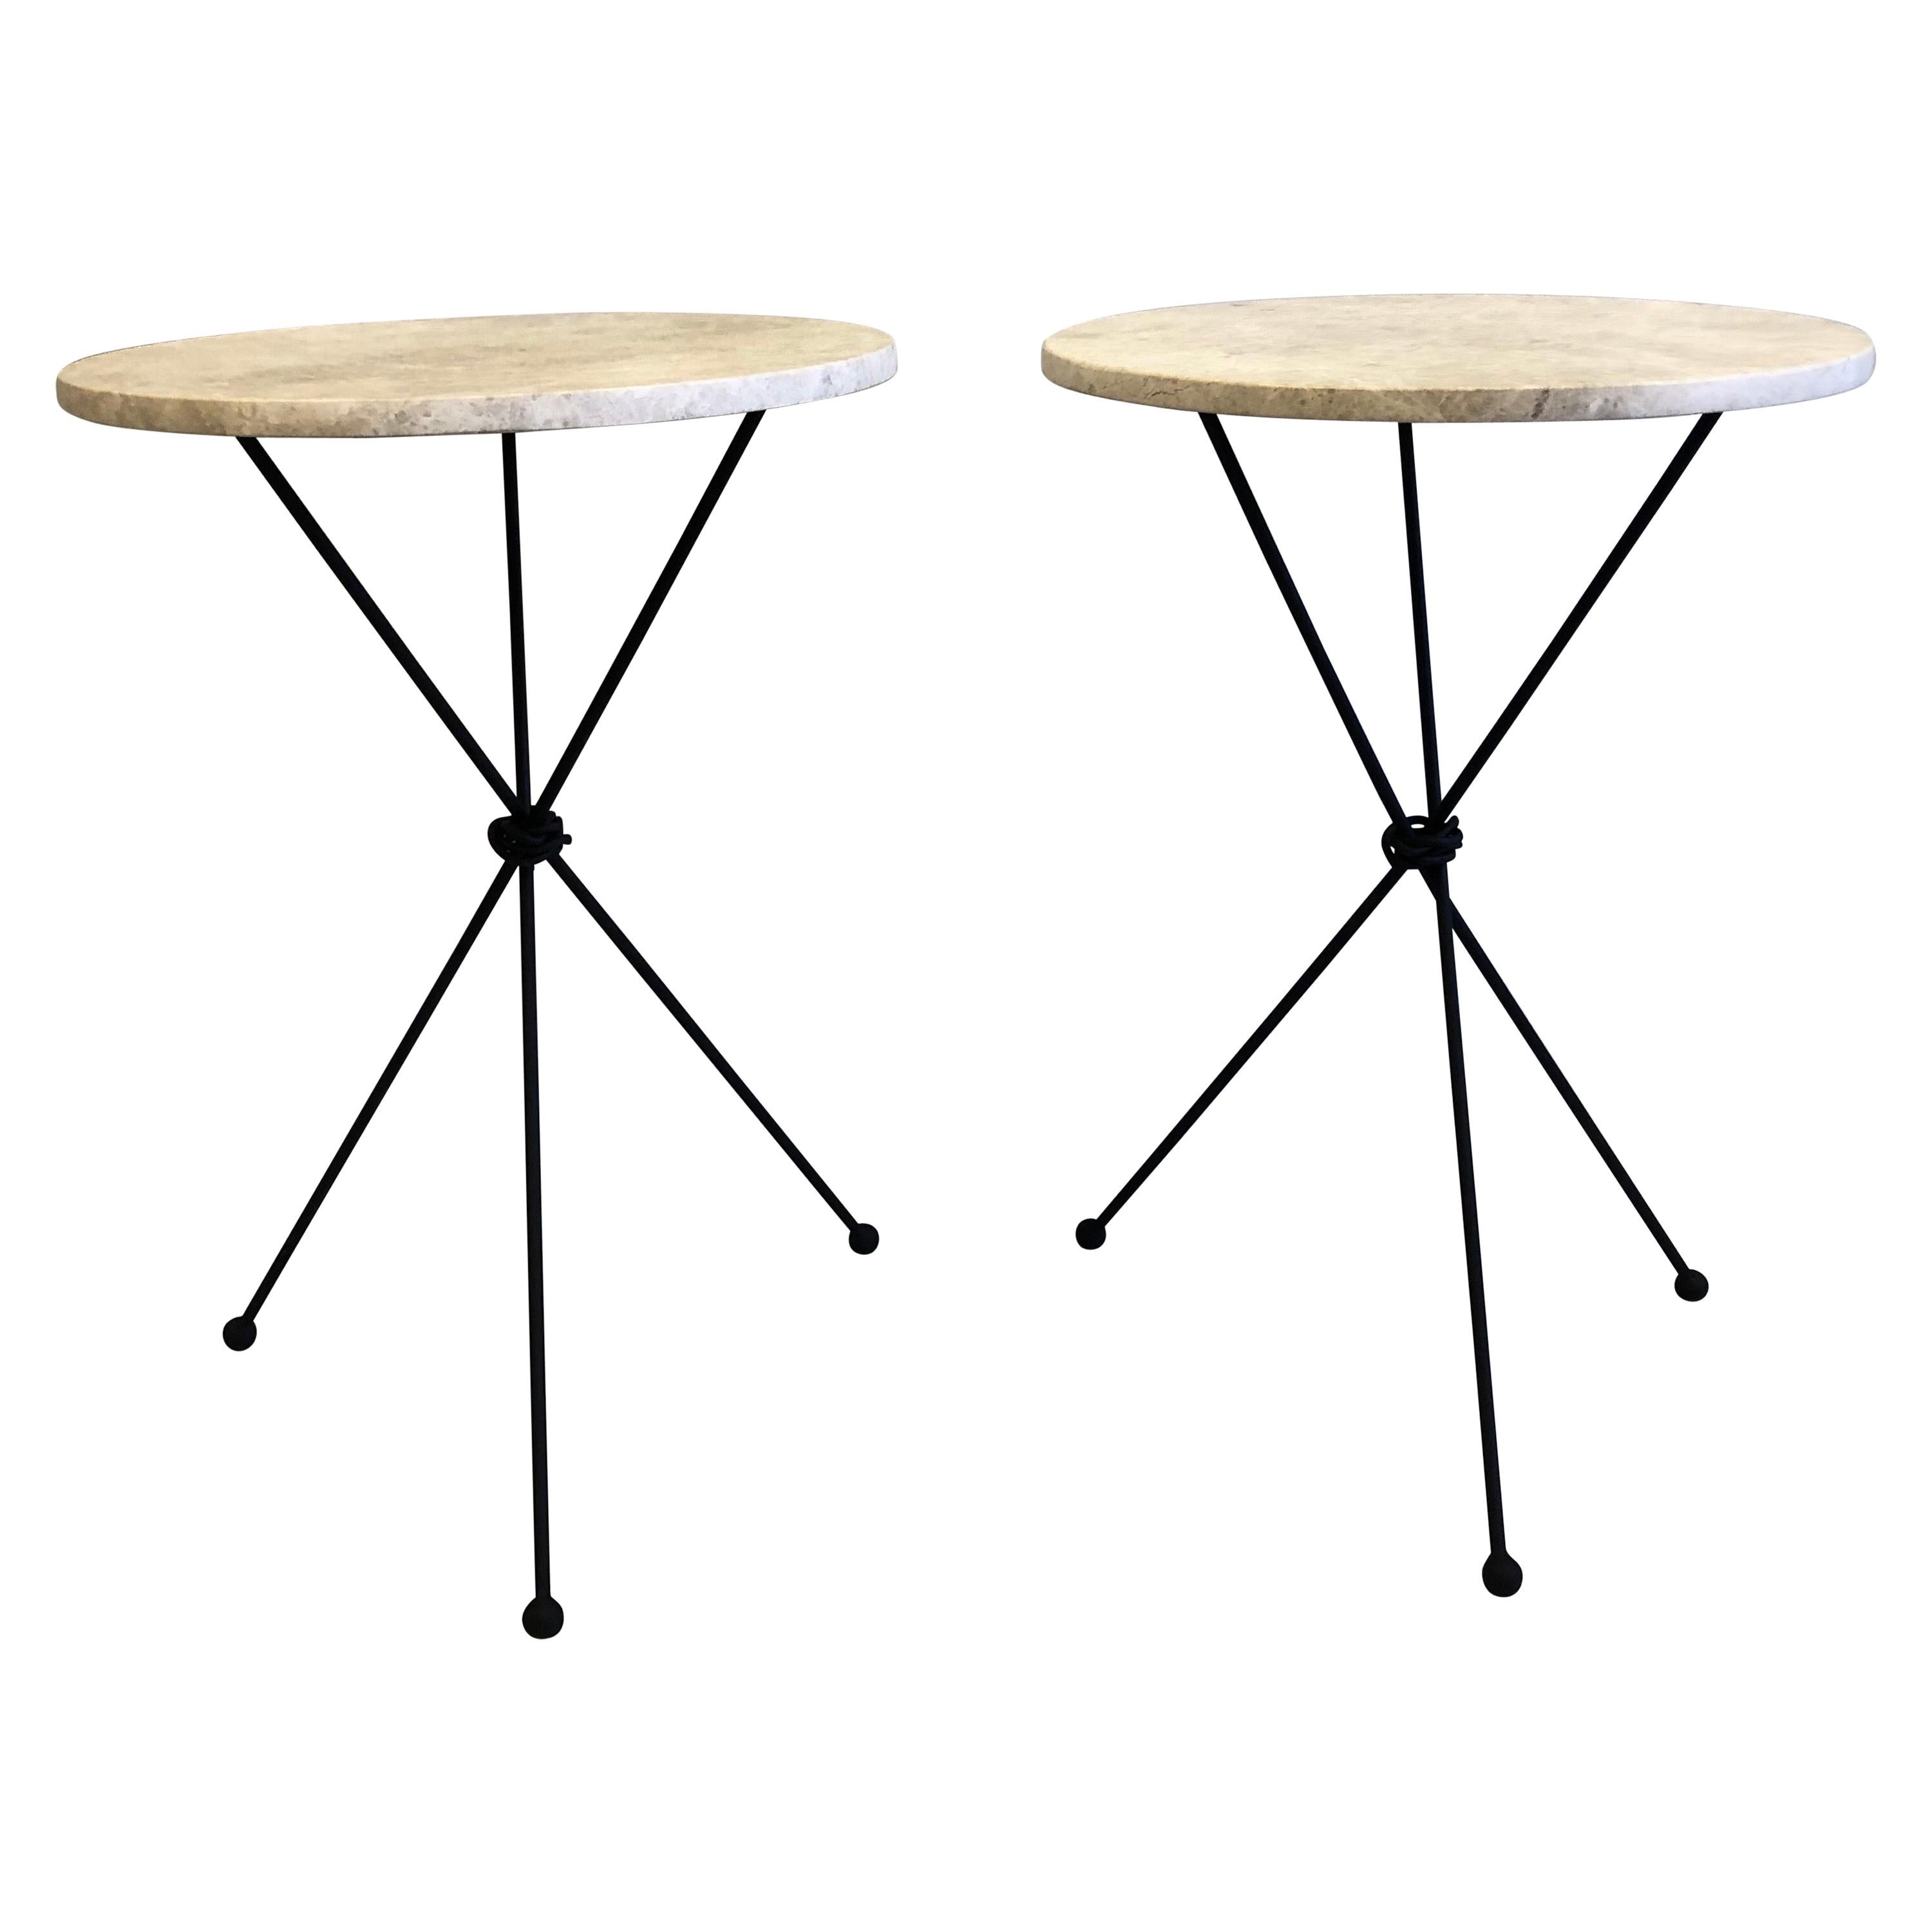 Pair of French Midcentury Iron & Limestone End/ Side Tables, Giacometti